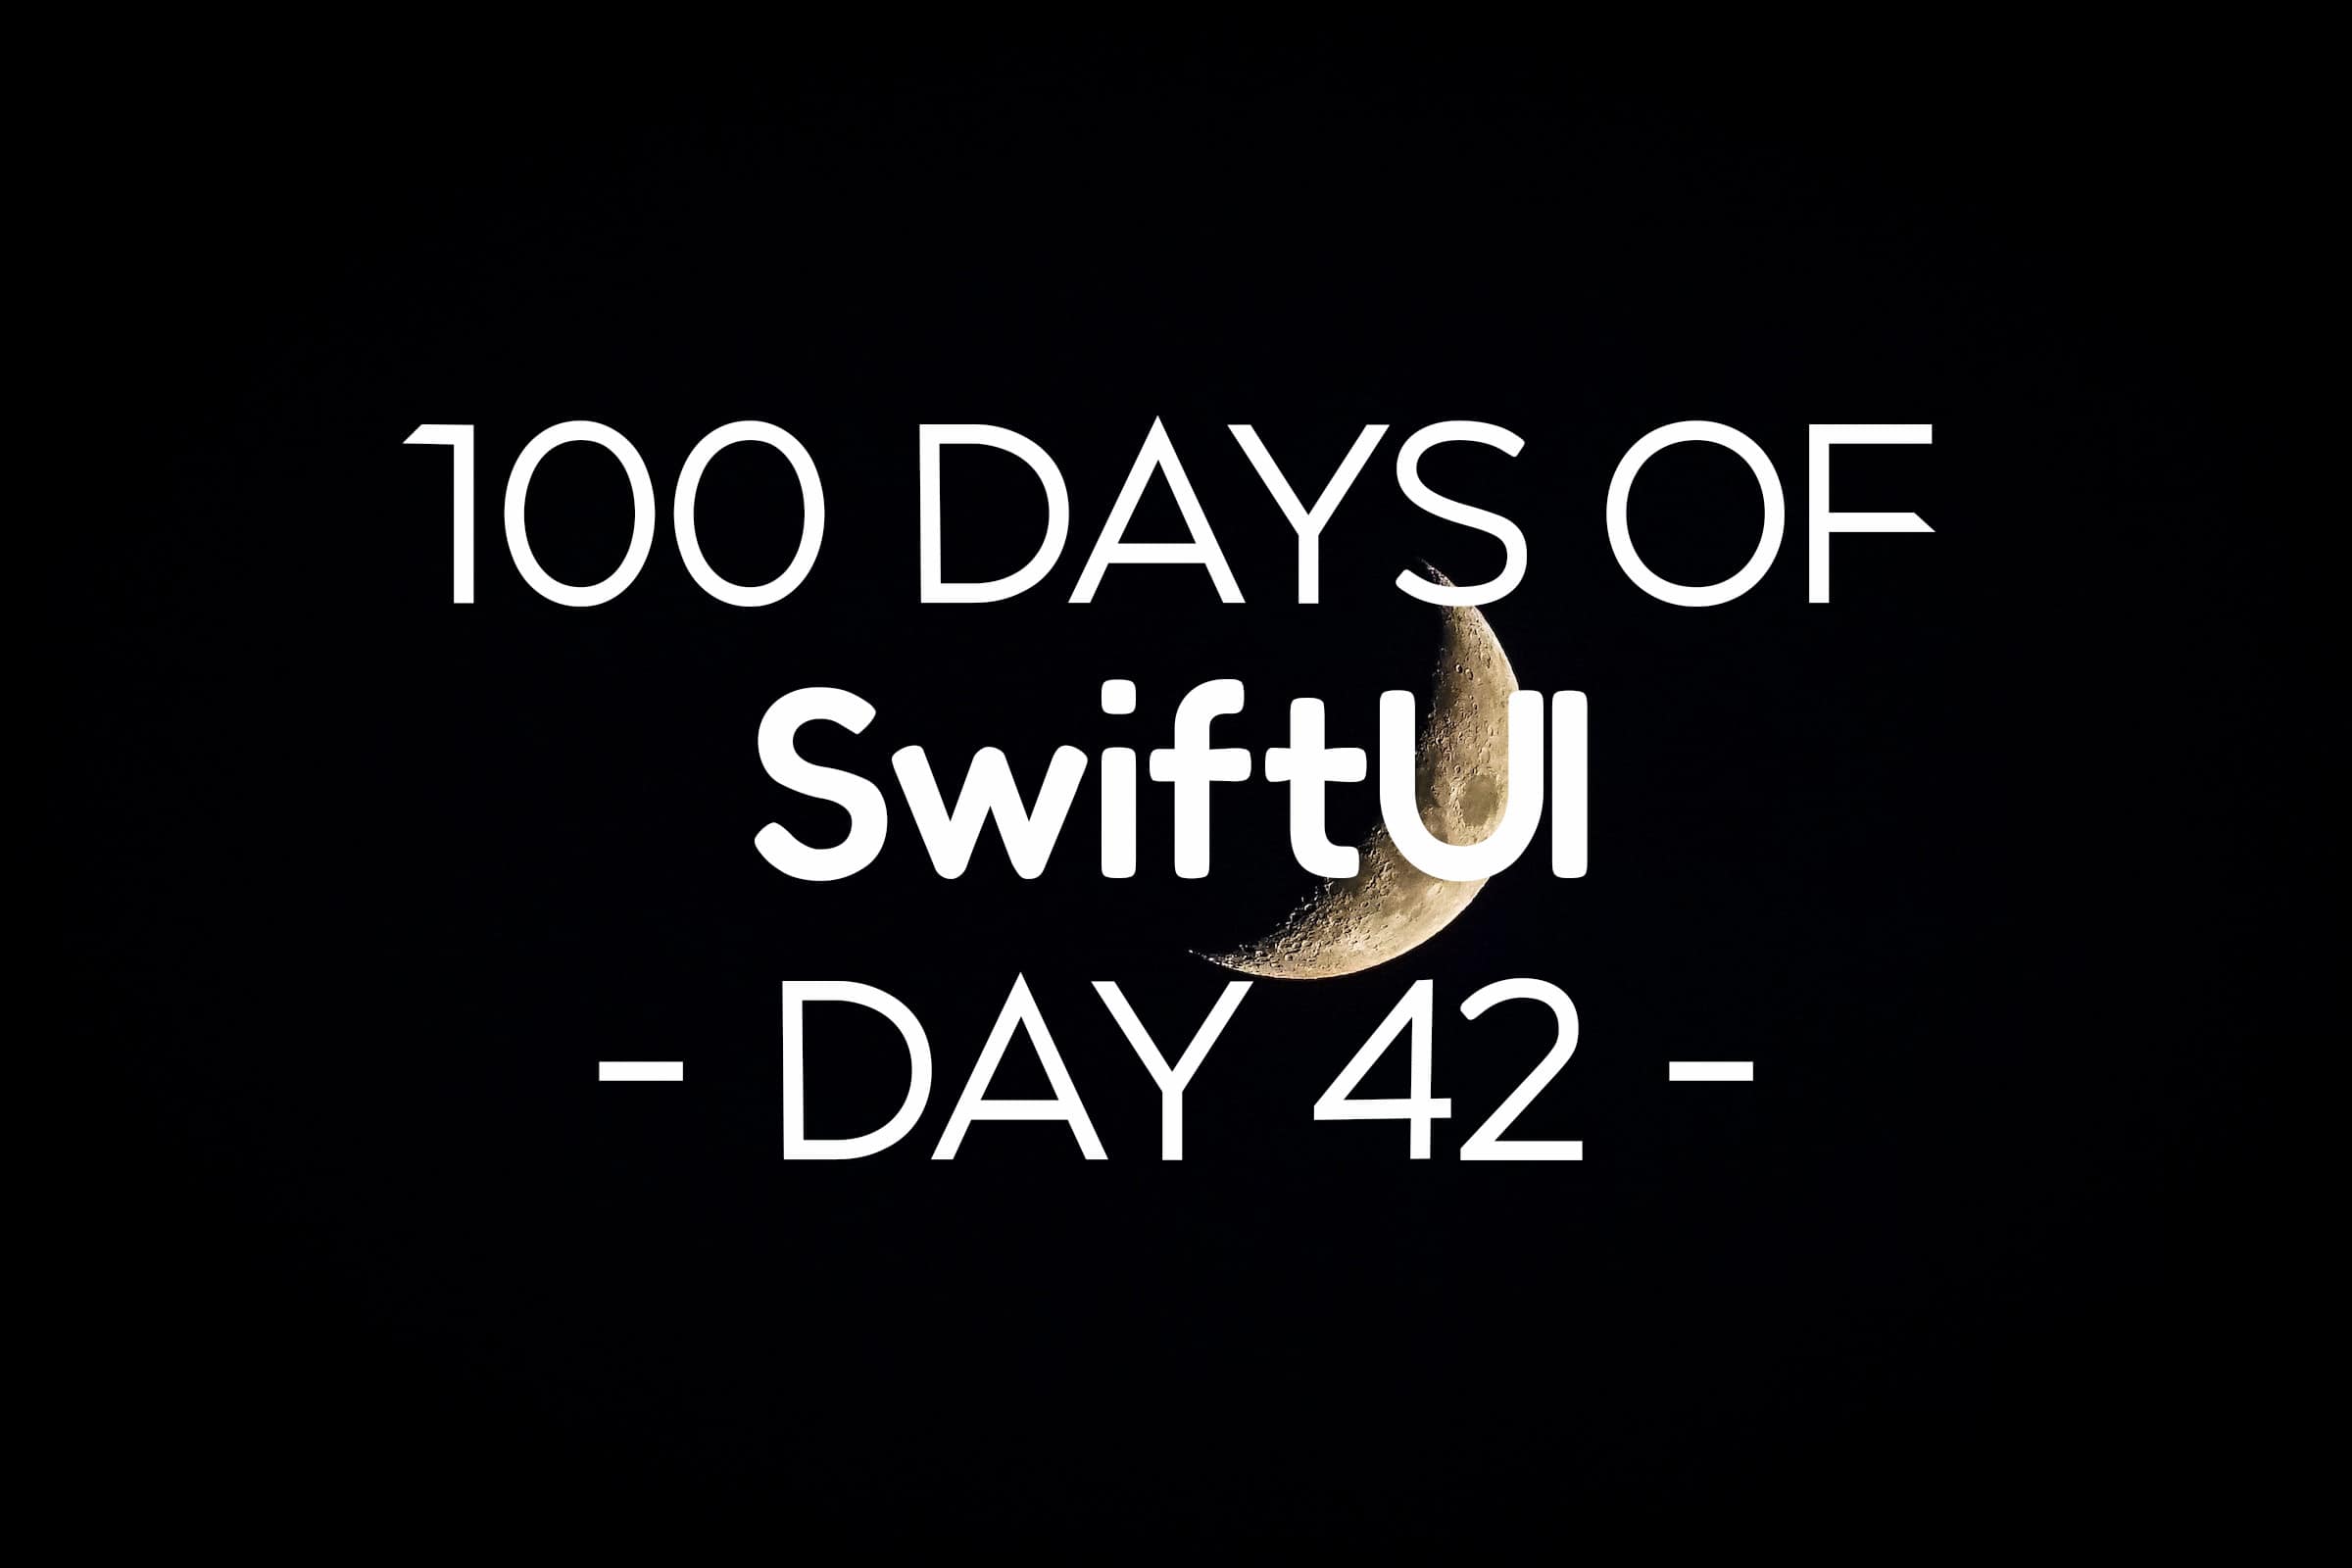 100 Days of SwiftUI Day 42